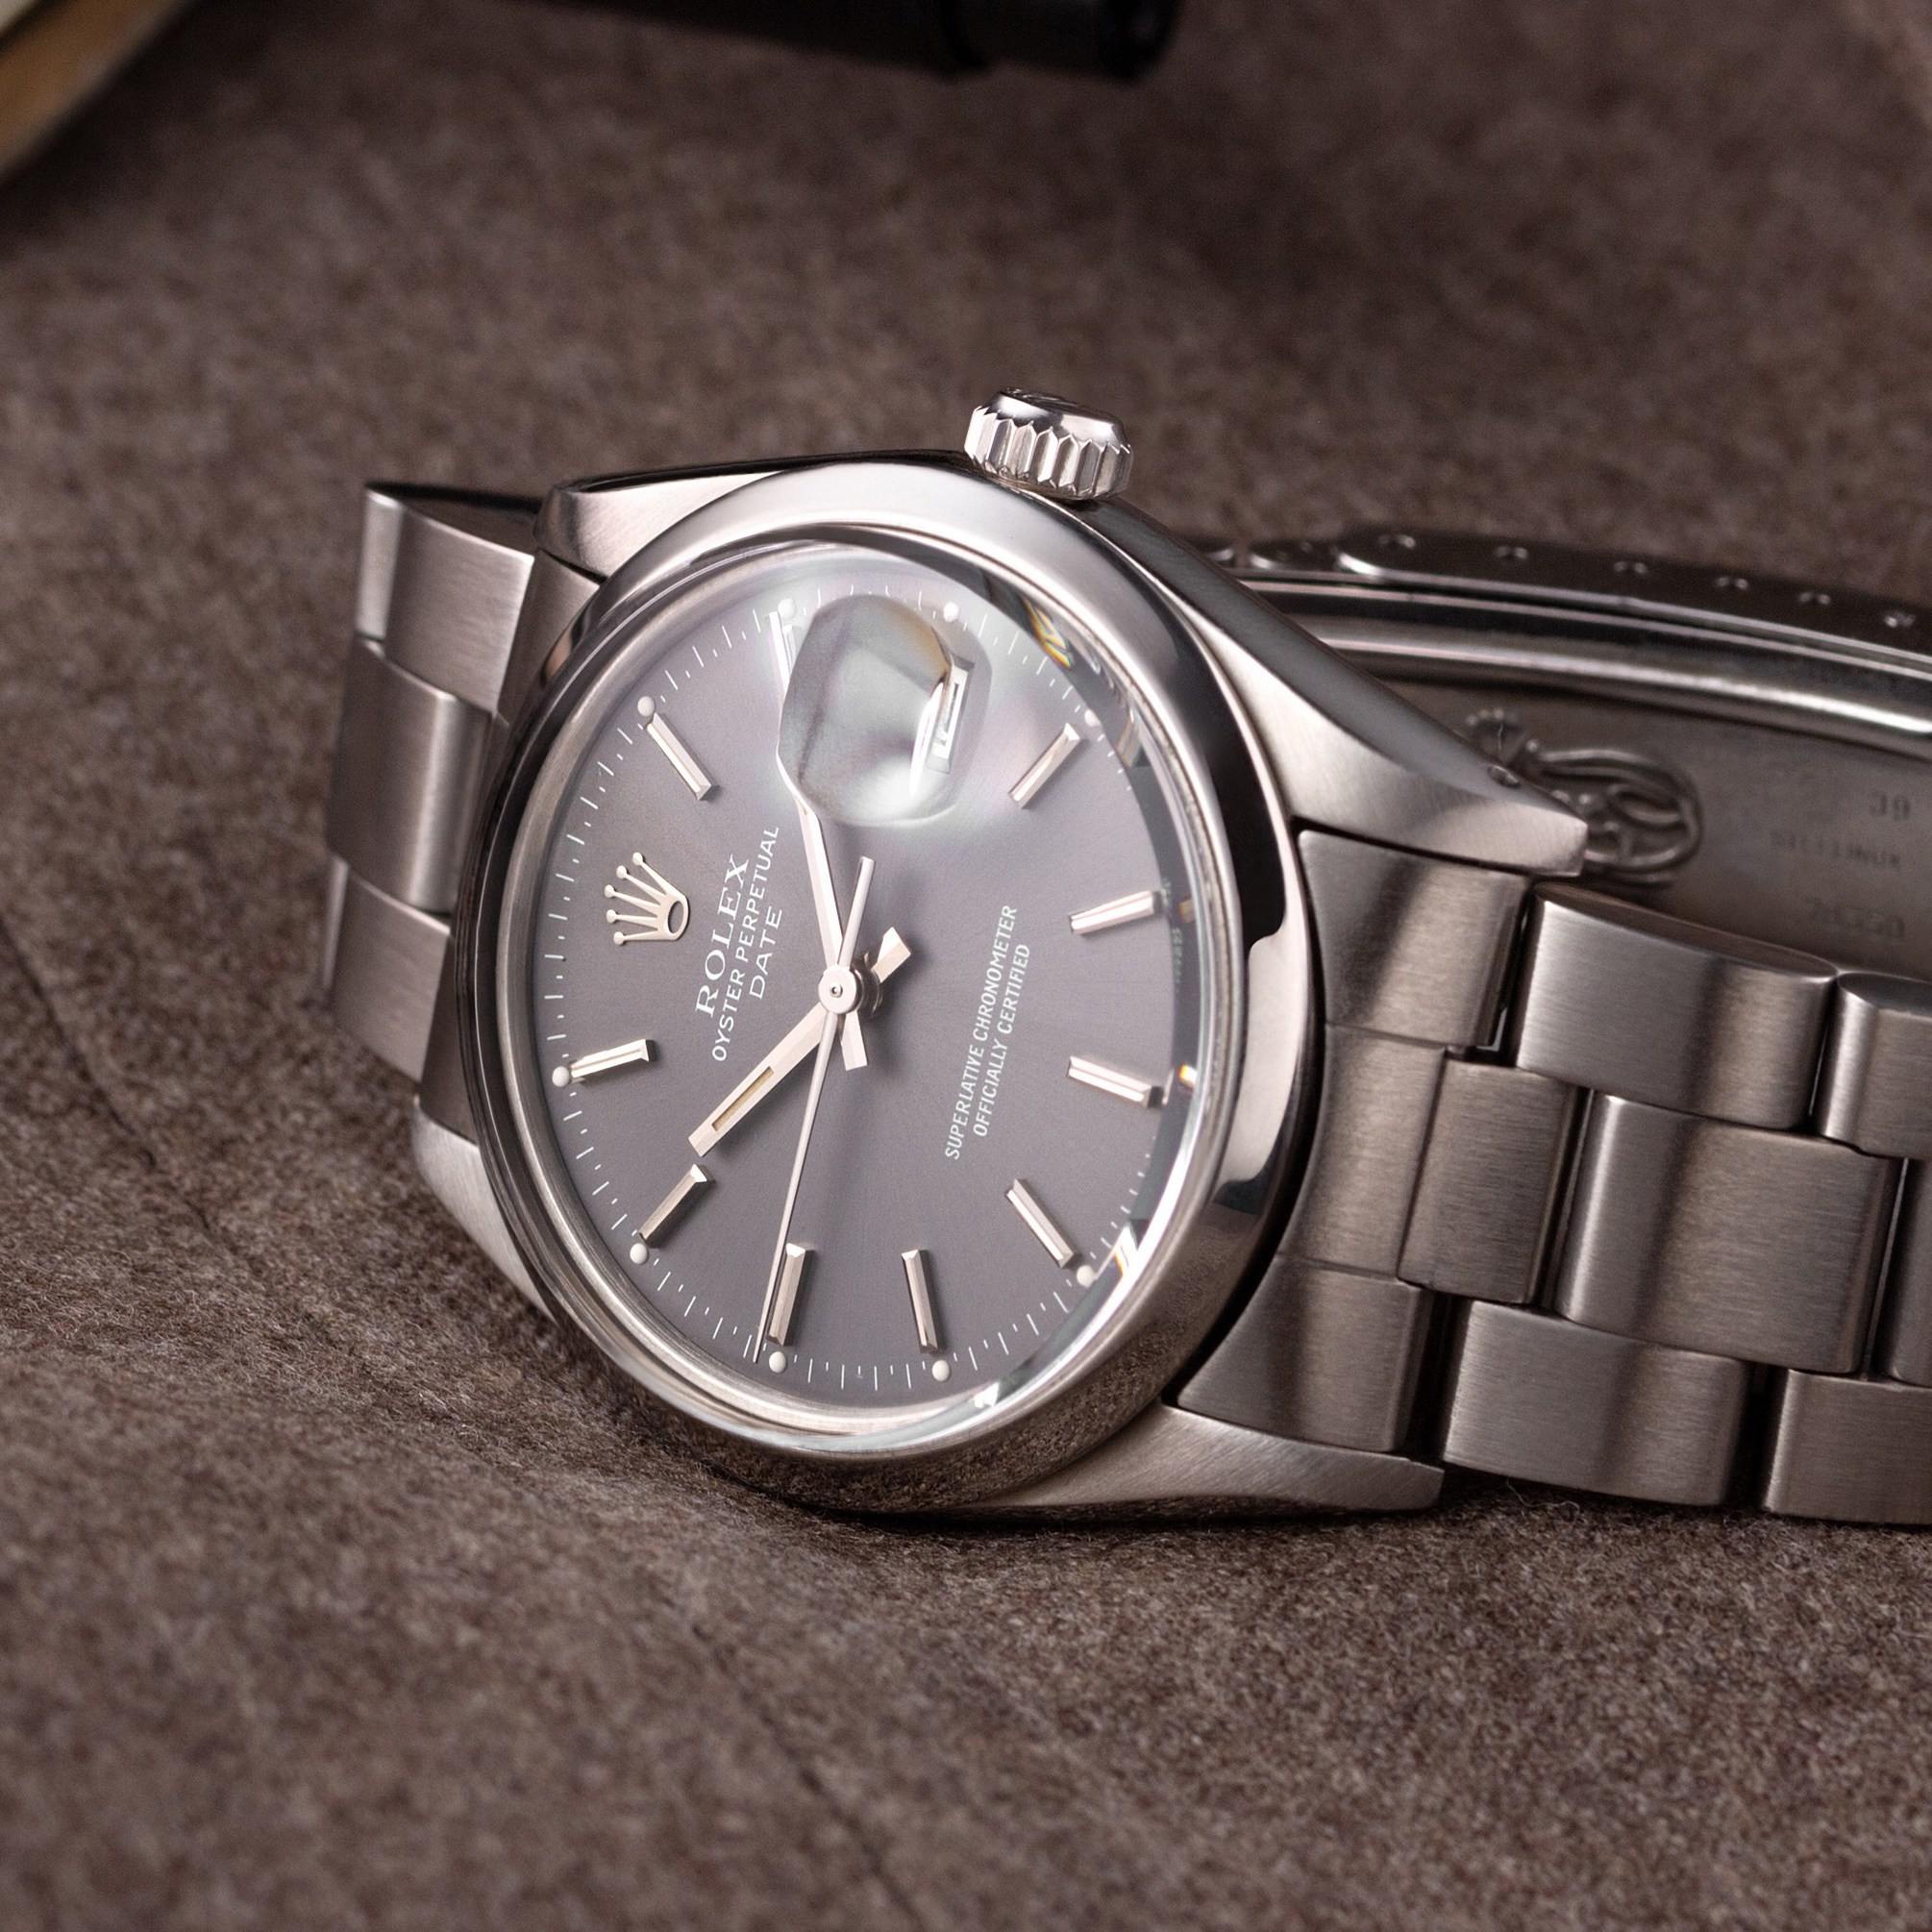 Rolex Oyster Perpetual Date 15000 grey dial - The Modest Man - crop